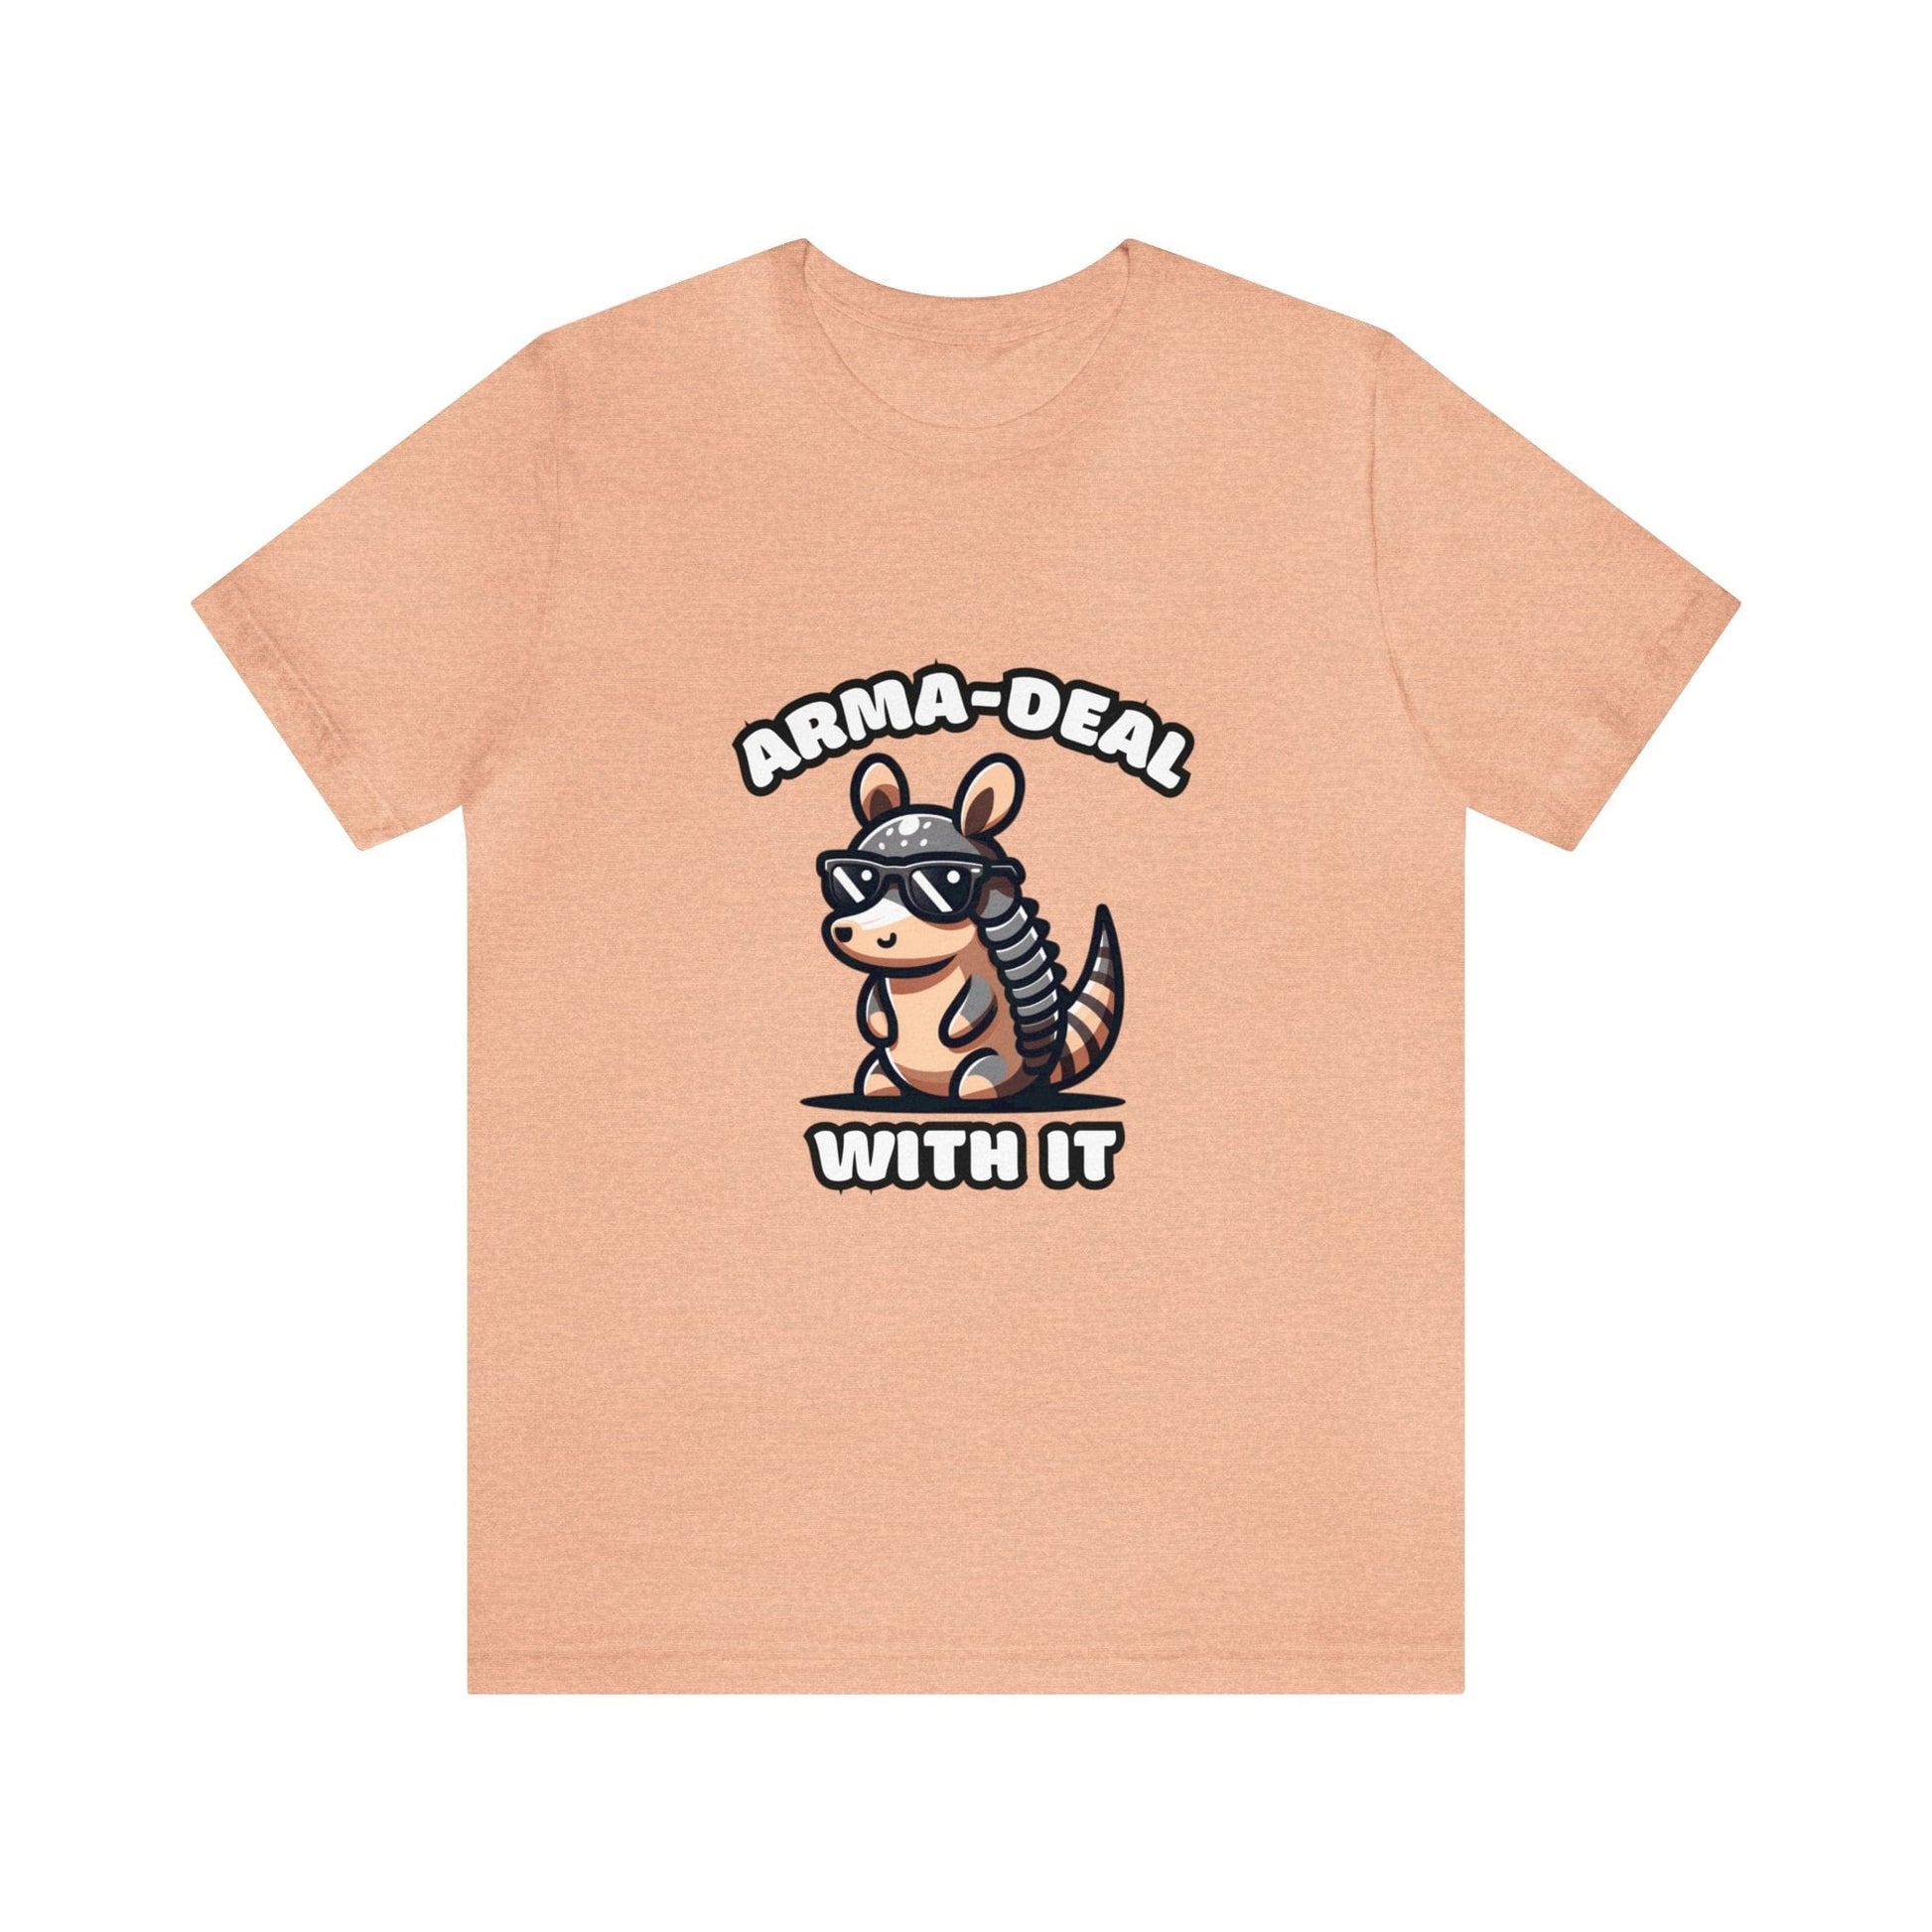 Arma-Deal With It - Armadillo T-shirt Peach / S